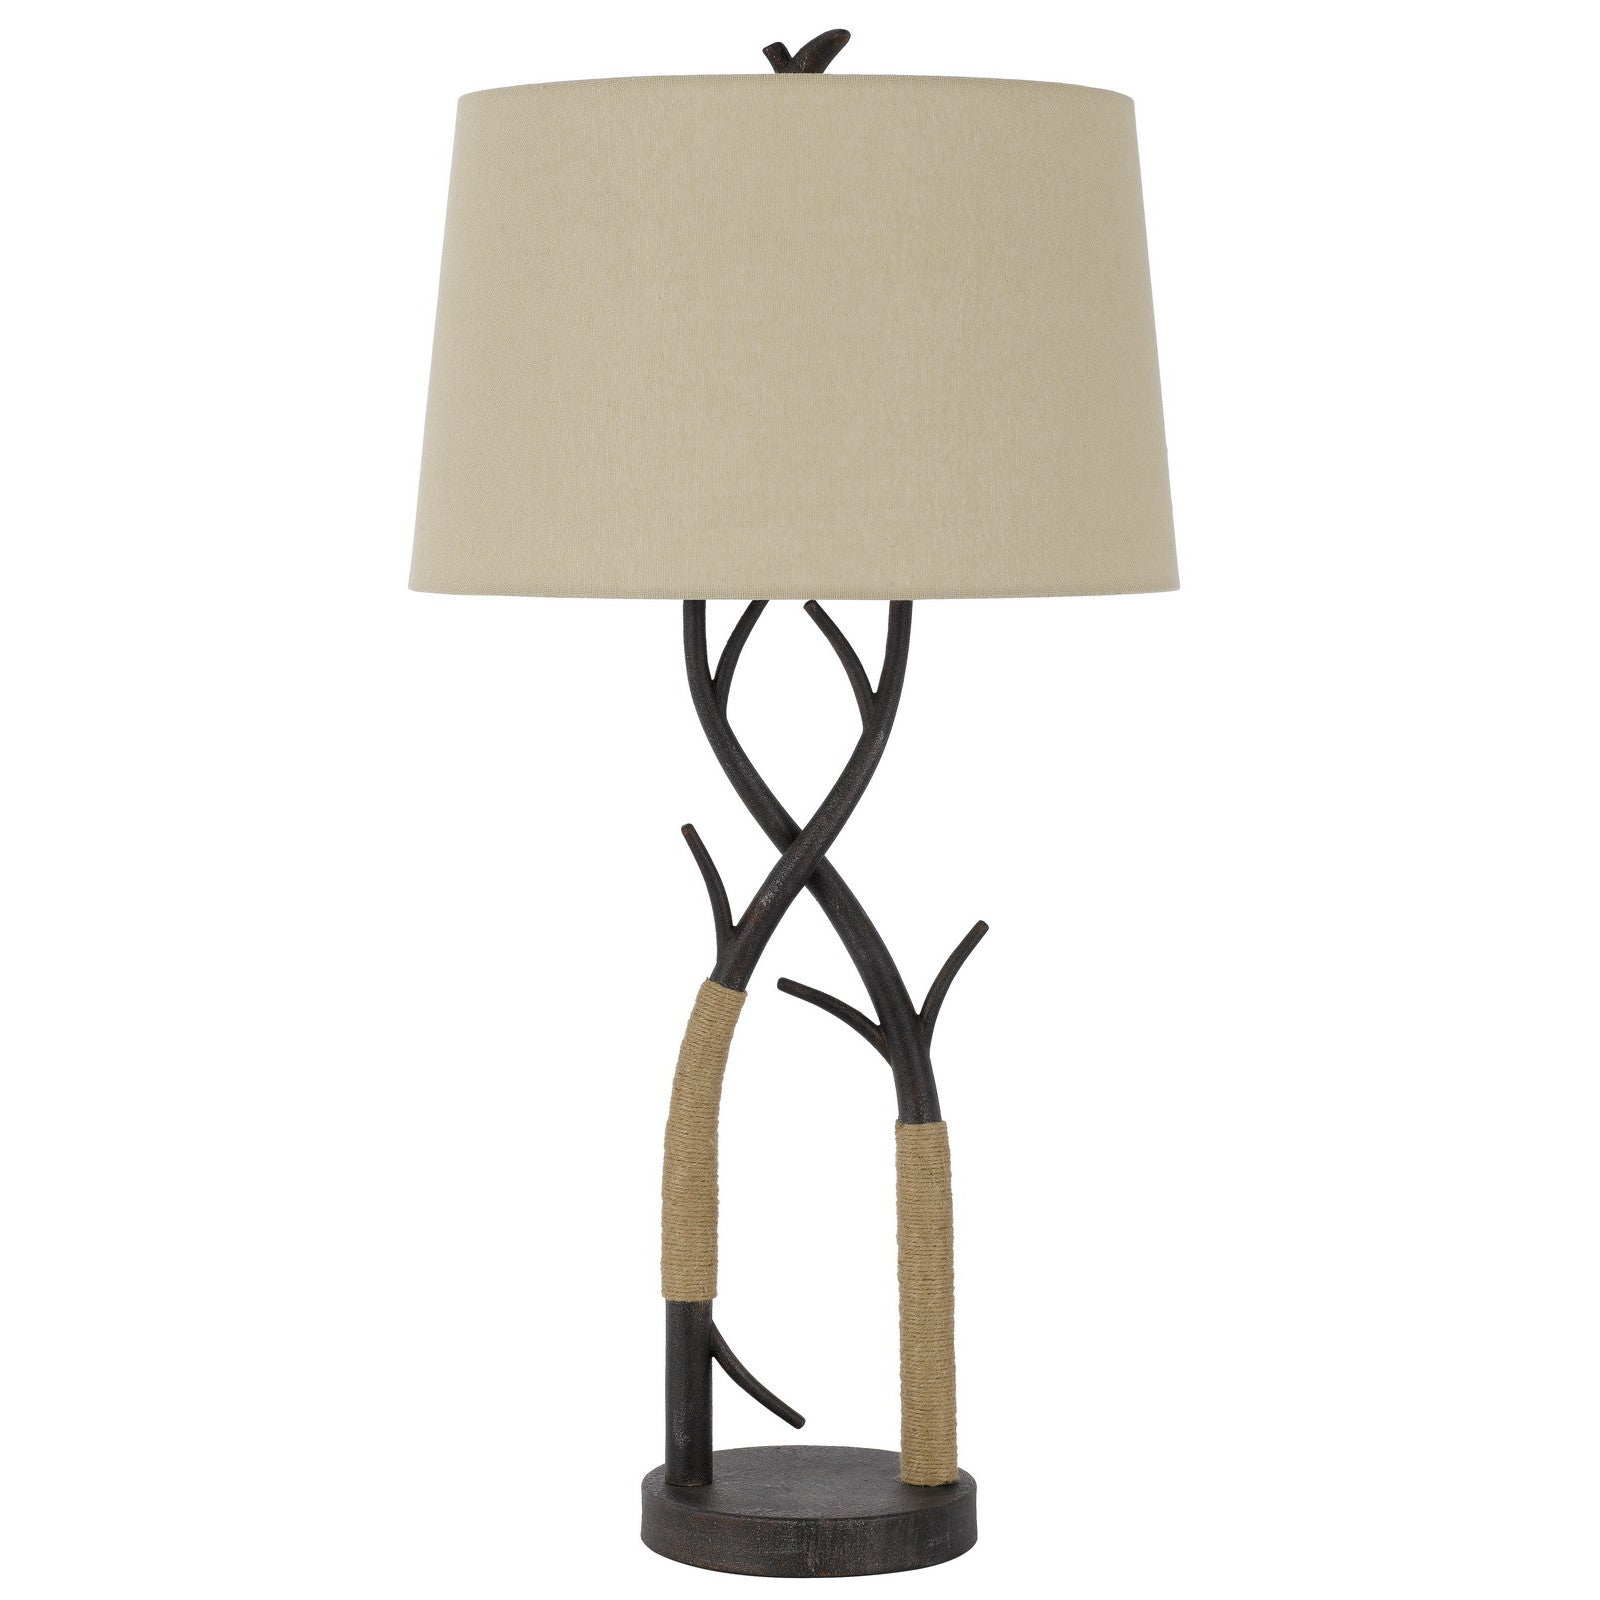 32" Charcoal Metal Table Lamp With Tan Empire Shade